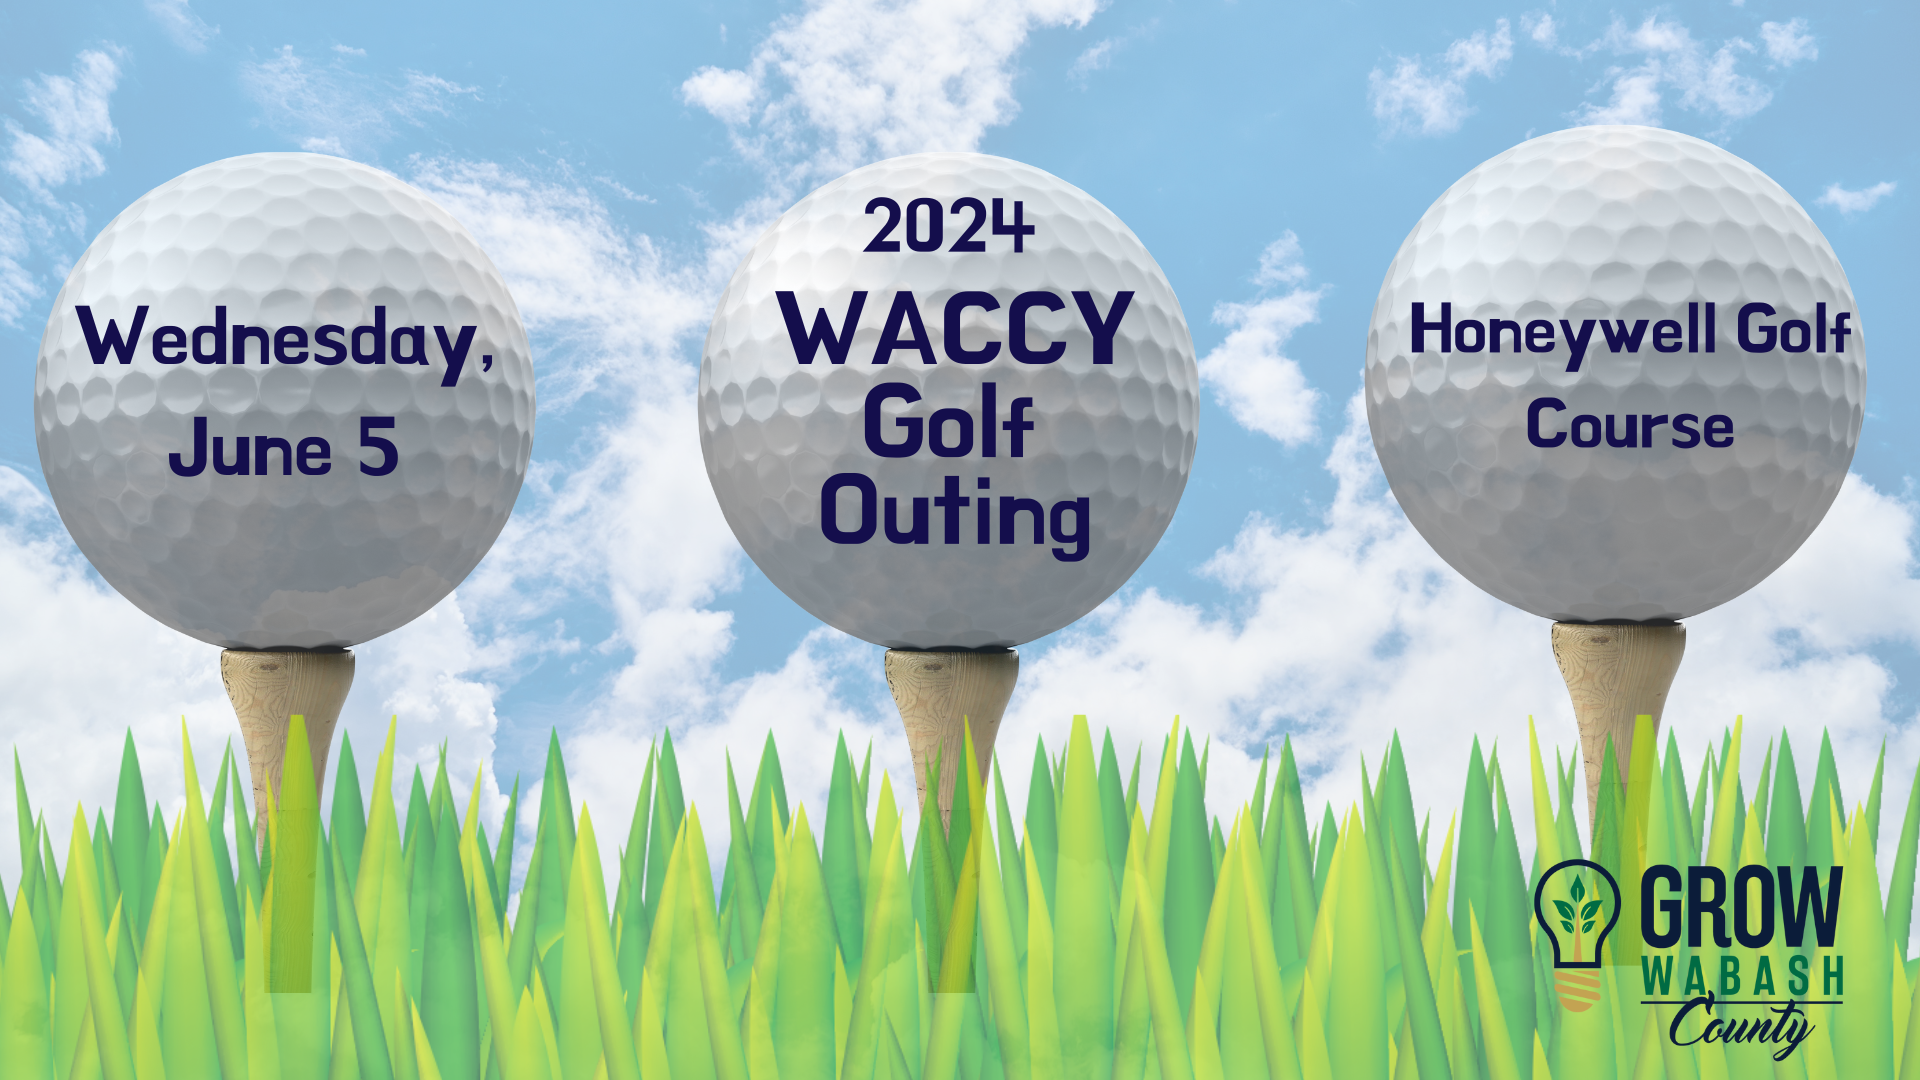 WACCY Golf Outing returns June 5 Photo